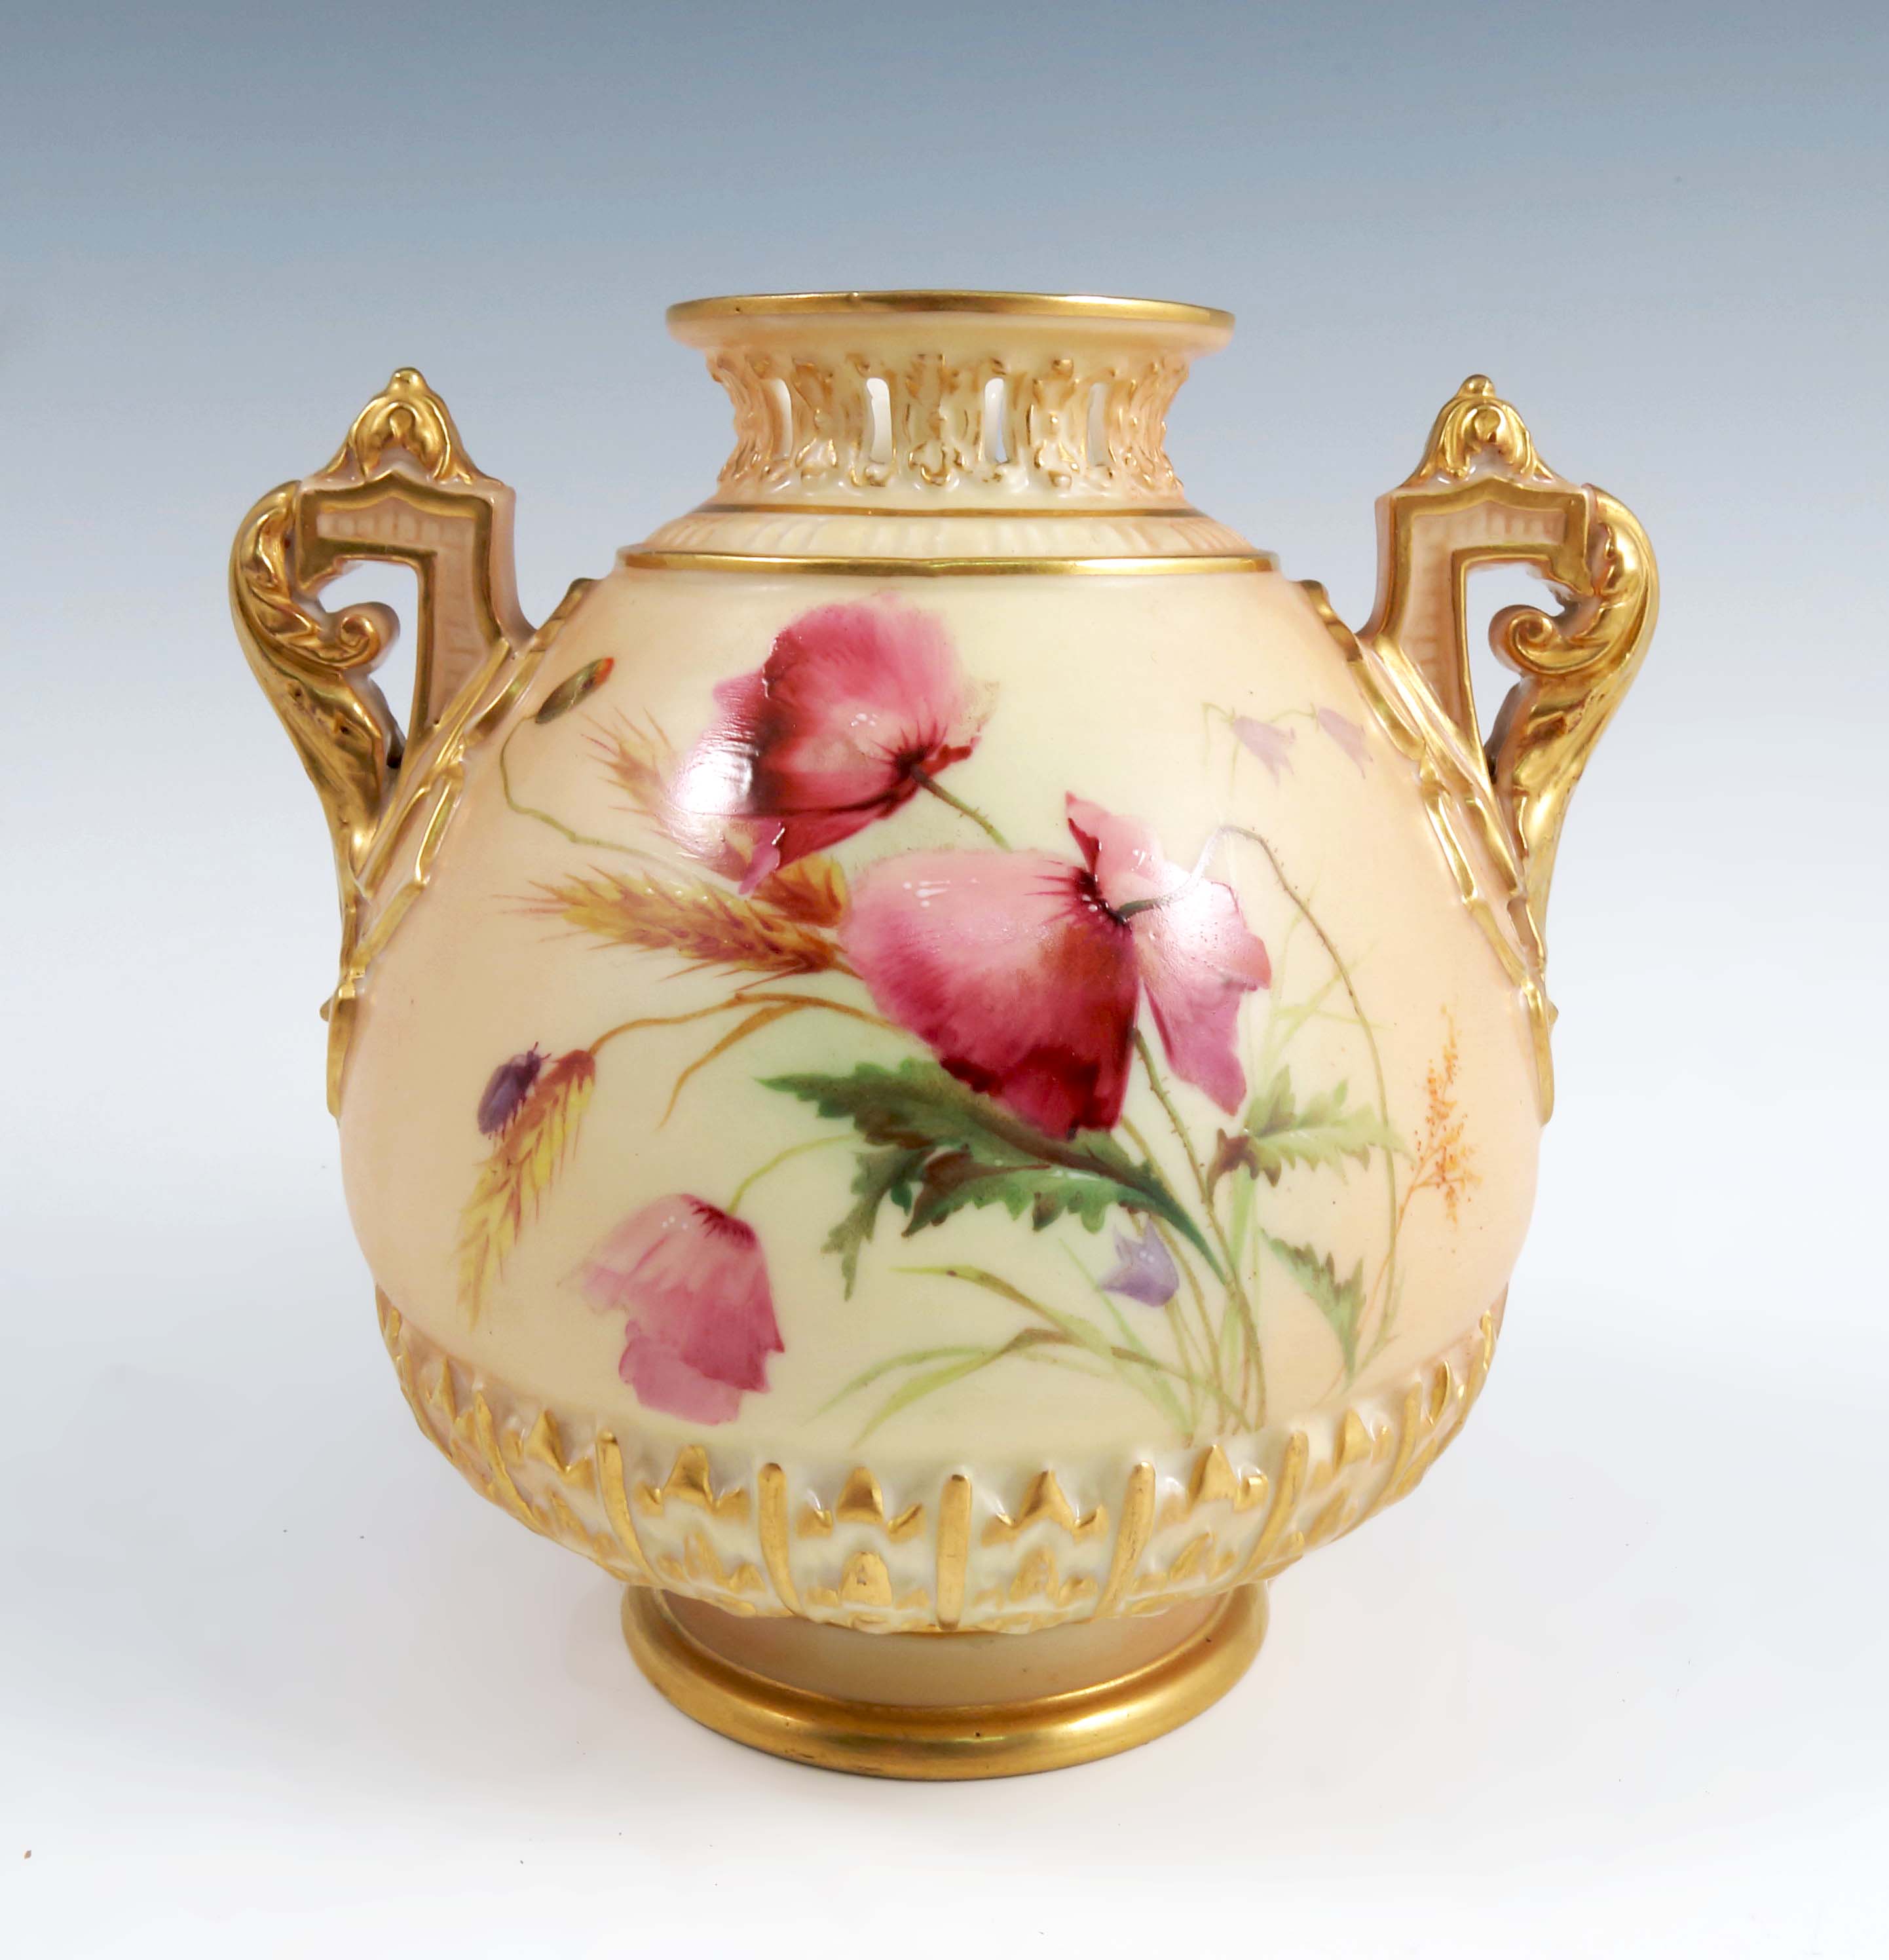 A Royal Worcester blush ivory two handled vase, decorated with poppies and insects, with pierced